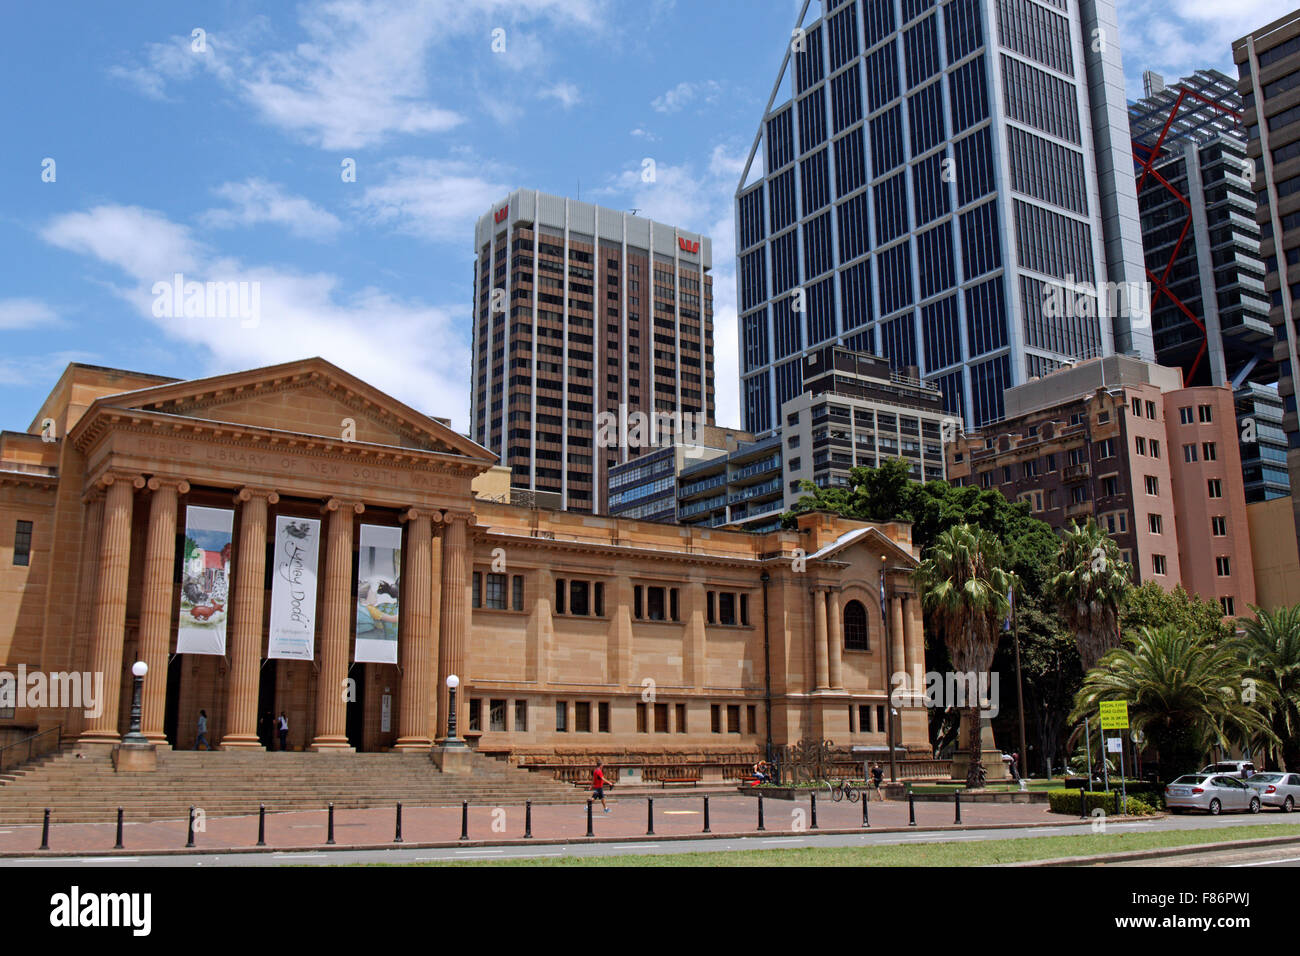 Public Library of New South Wales ich Sydney ich Australien Stockfoto